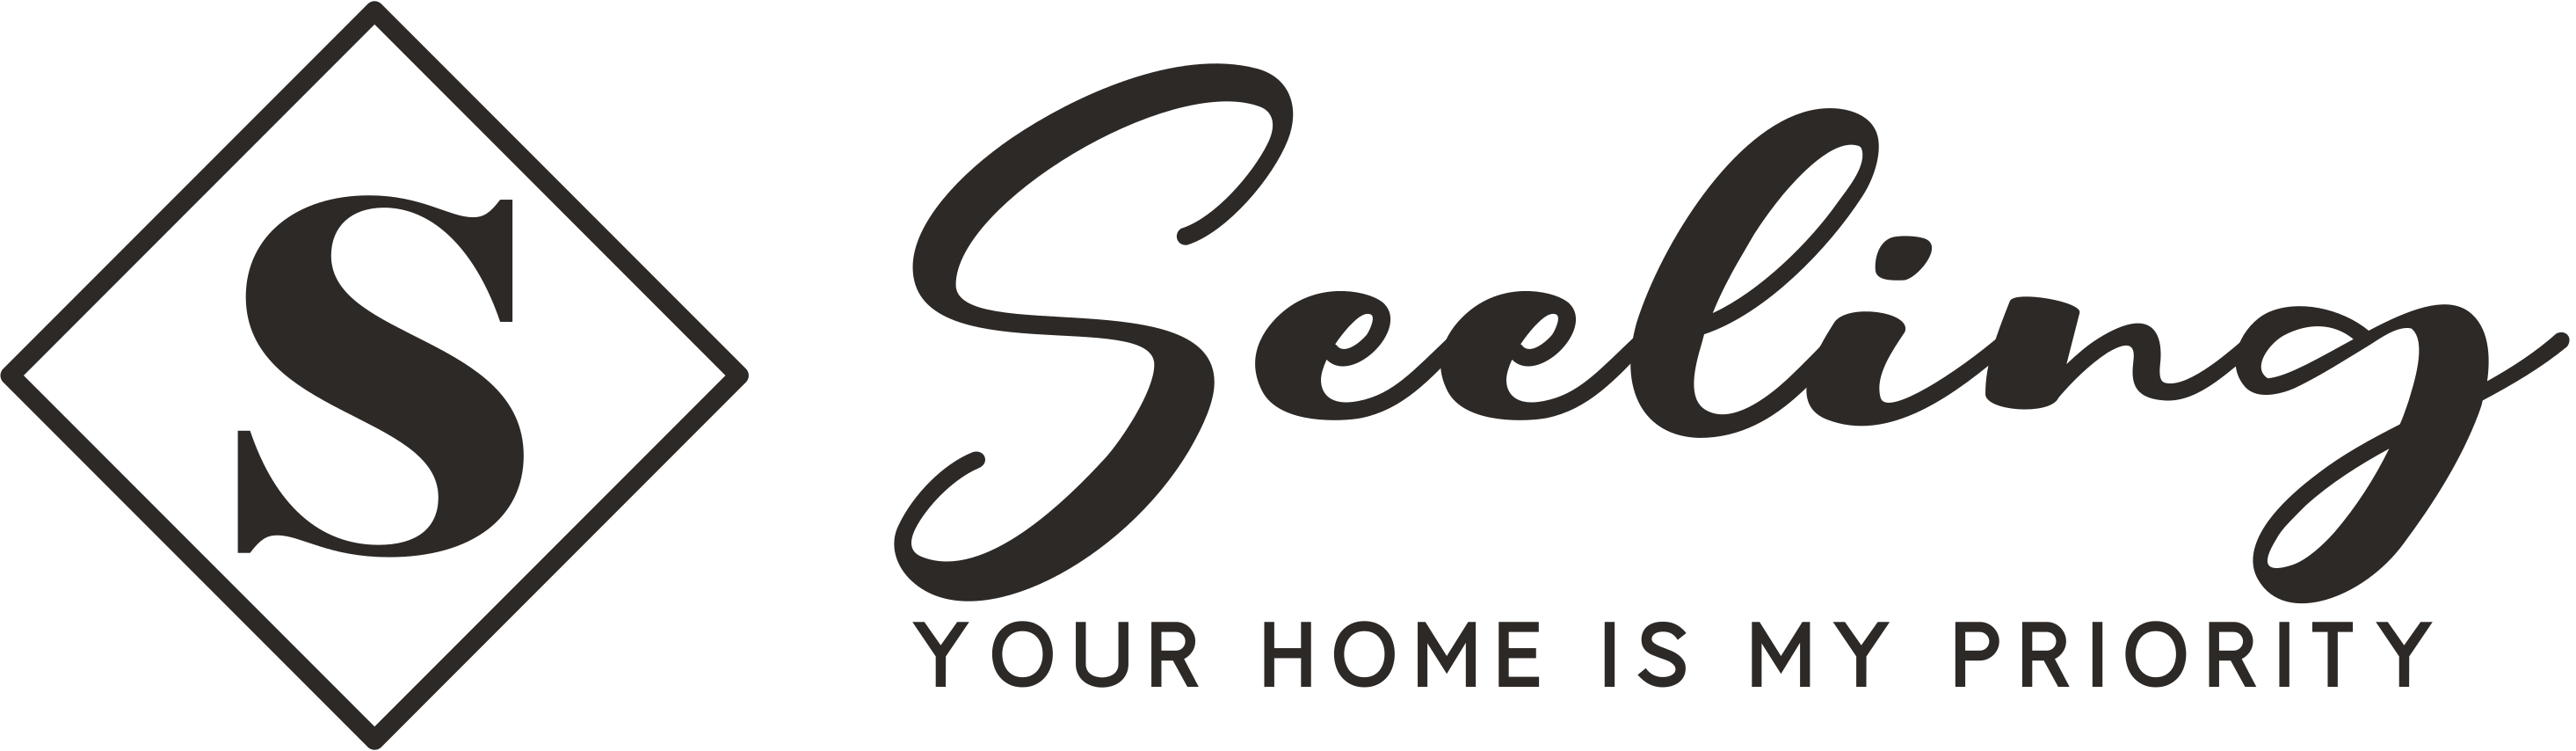 SEELING YOUR HOME